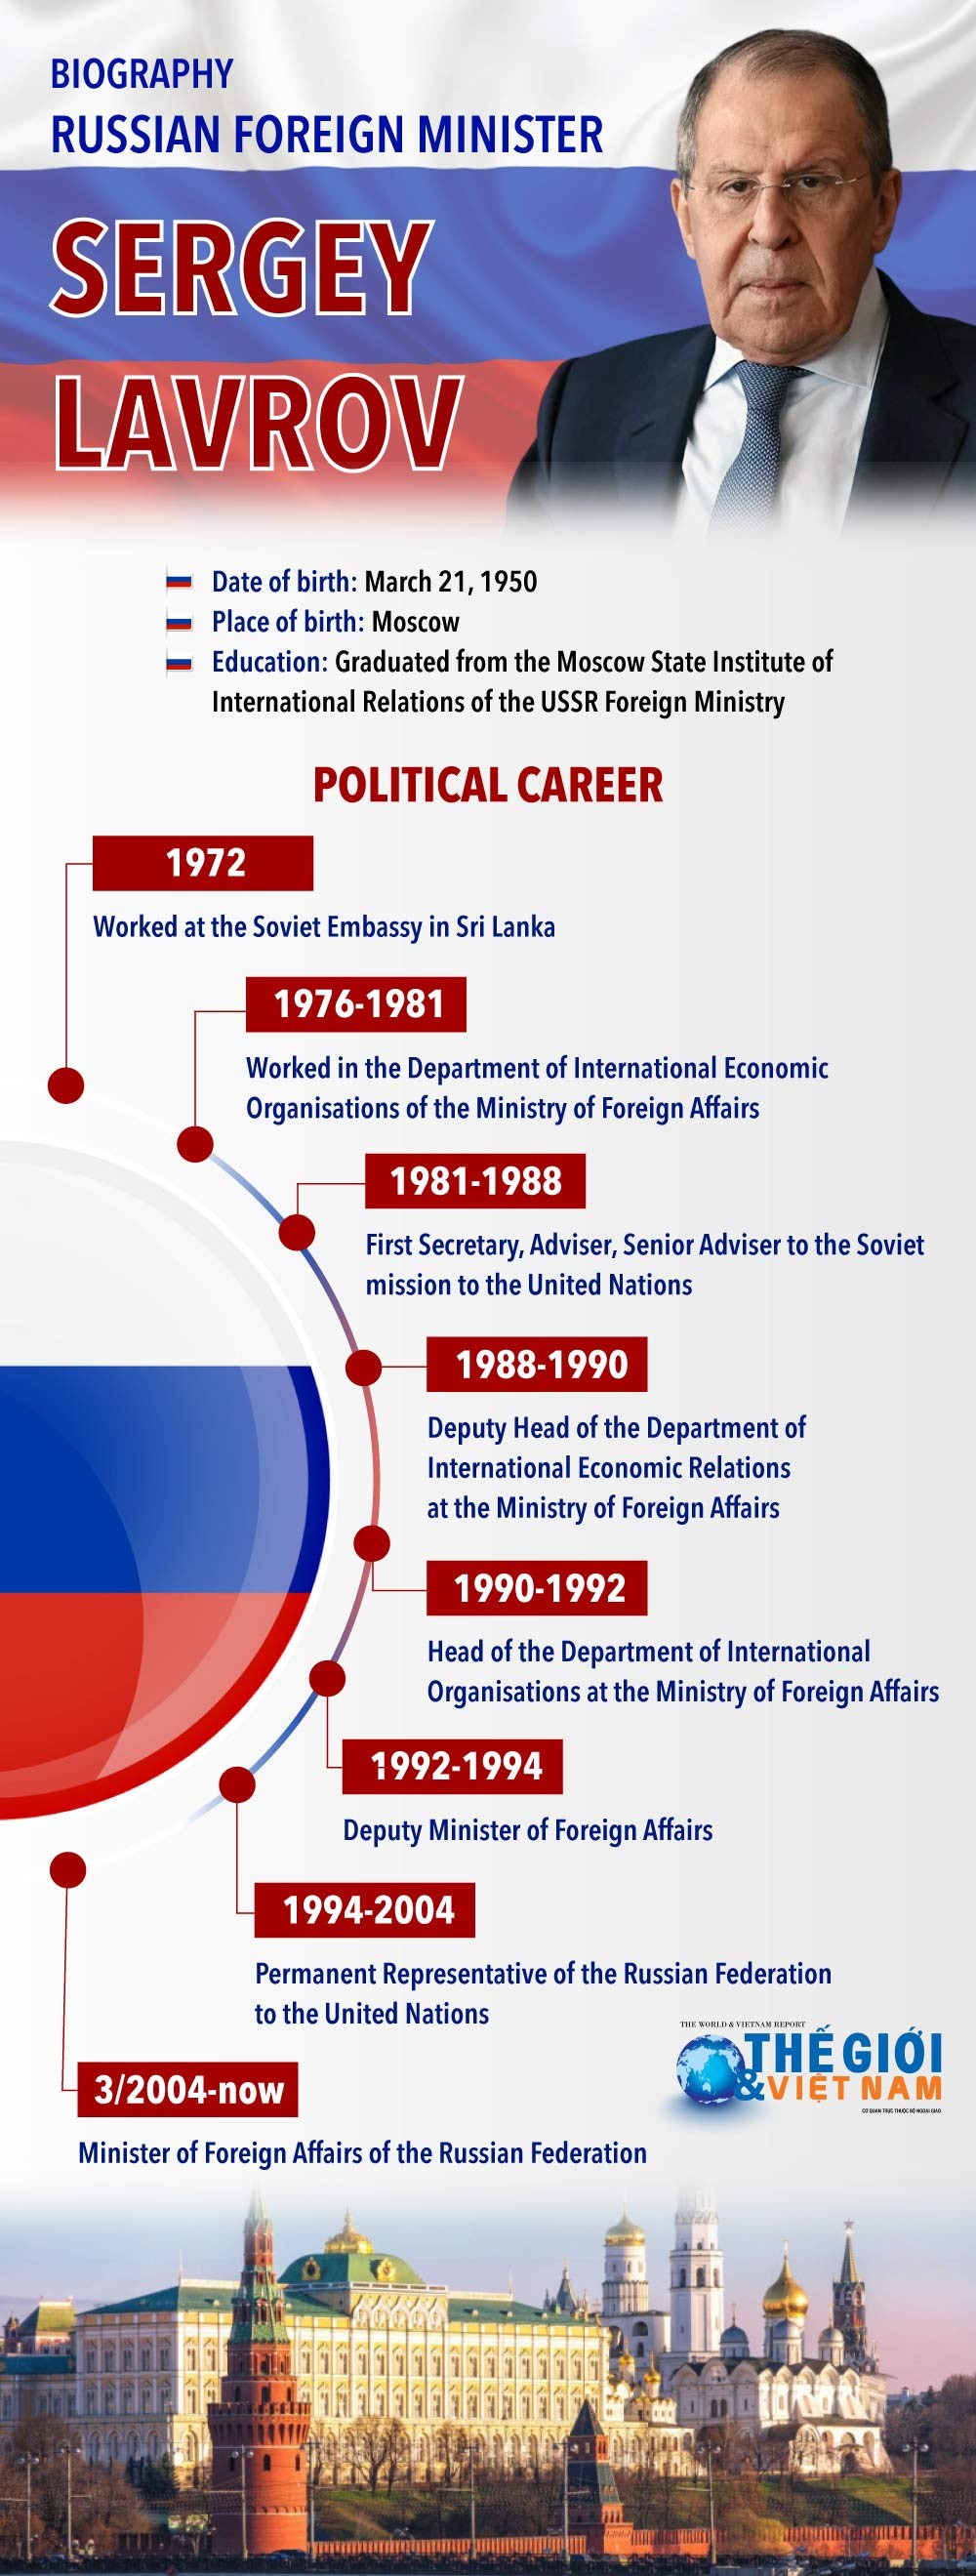 Biography of Russian Foreign Minister Sergey Lavrov